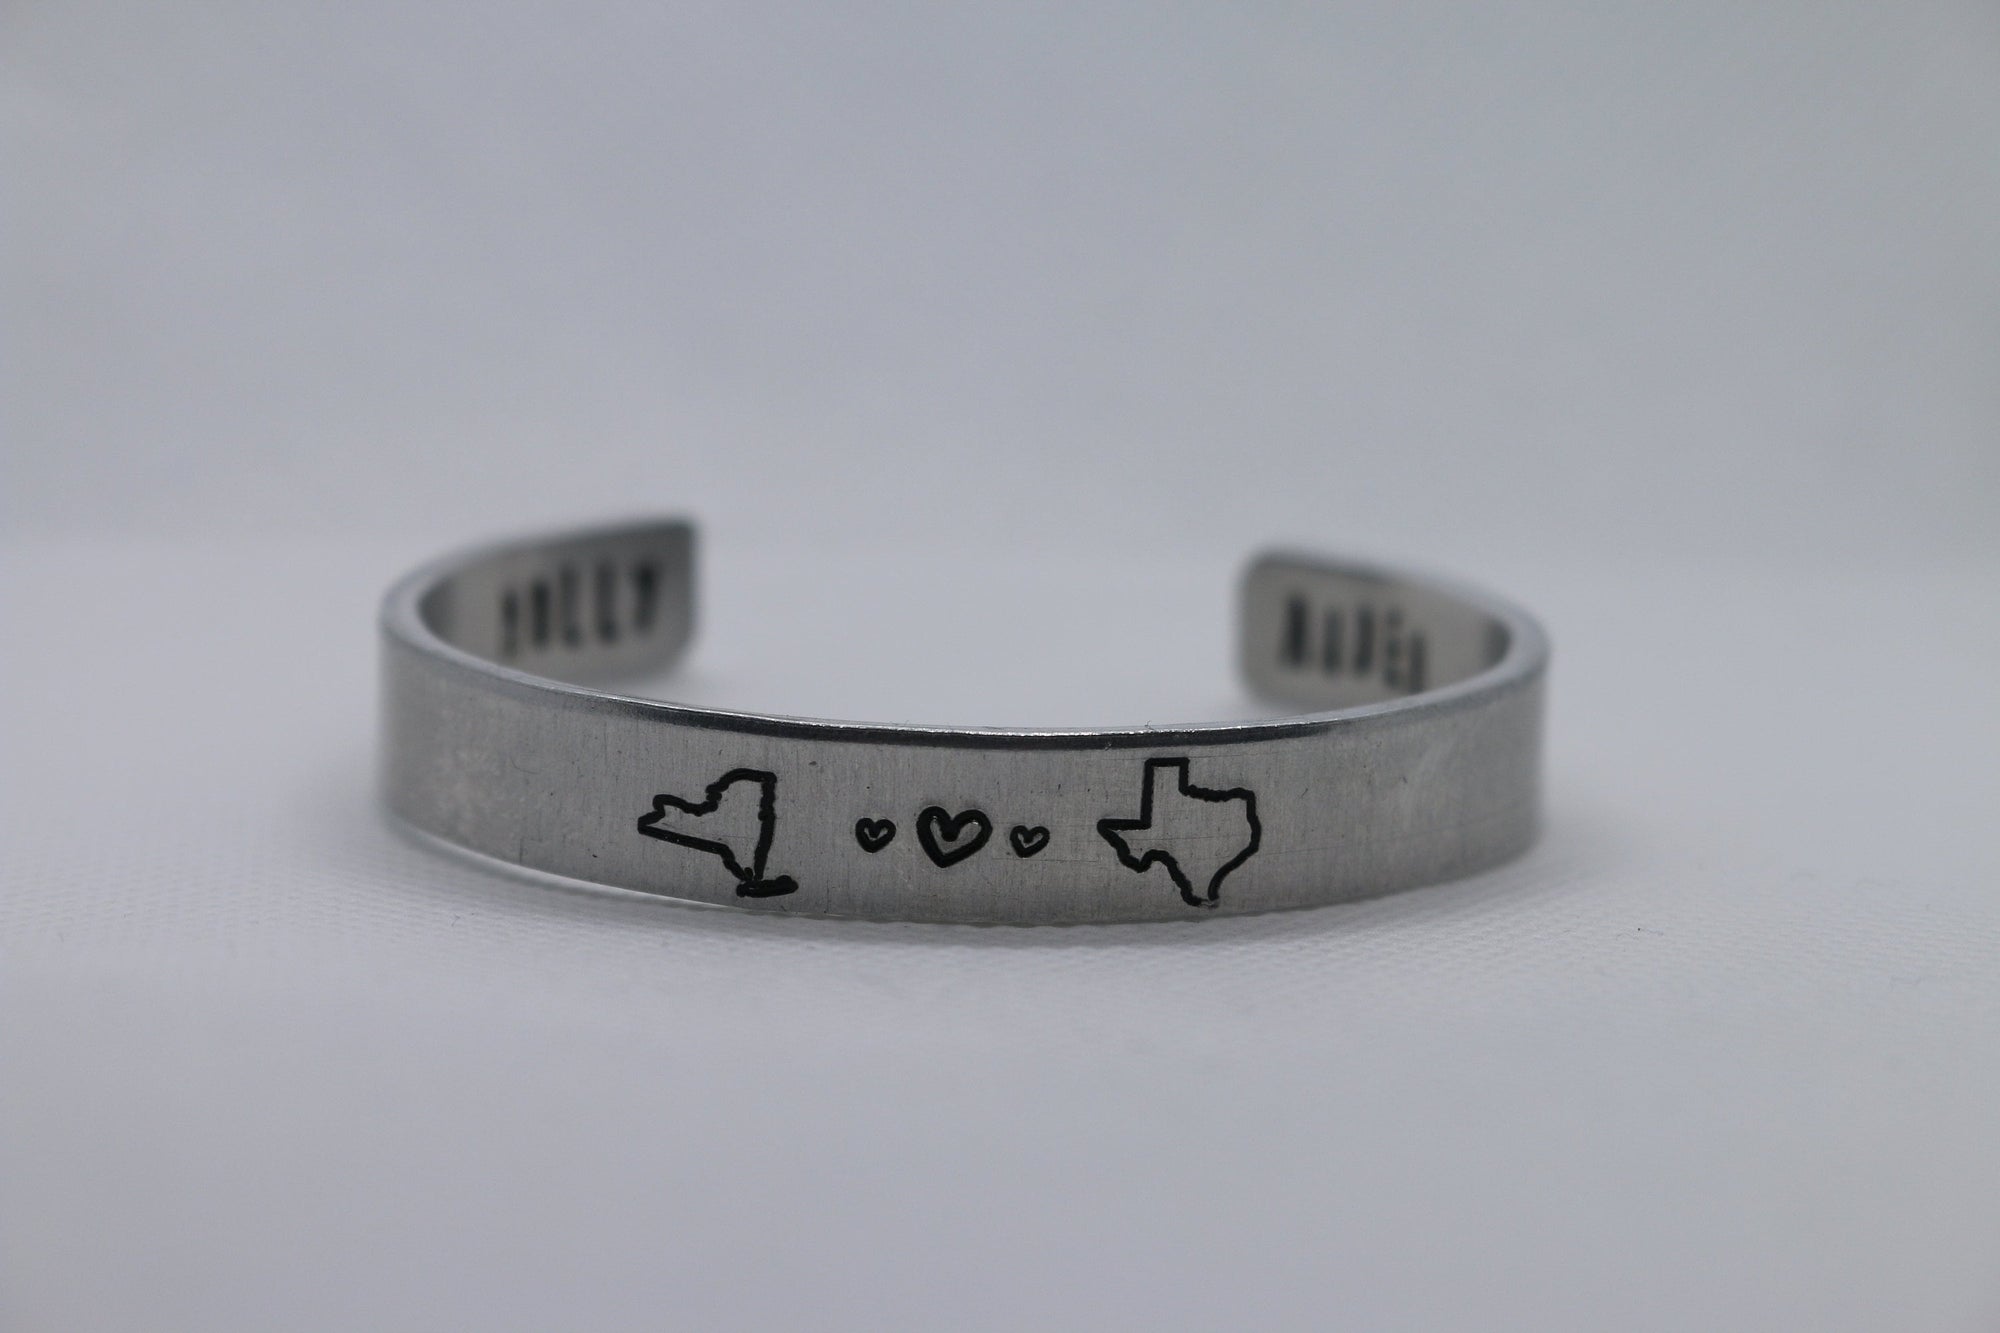 Long Distance Relationship State Stamped Aluminum Bangle | USA State To State | Couples Living Apart | Going Away | College Student Gift